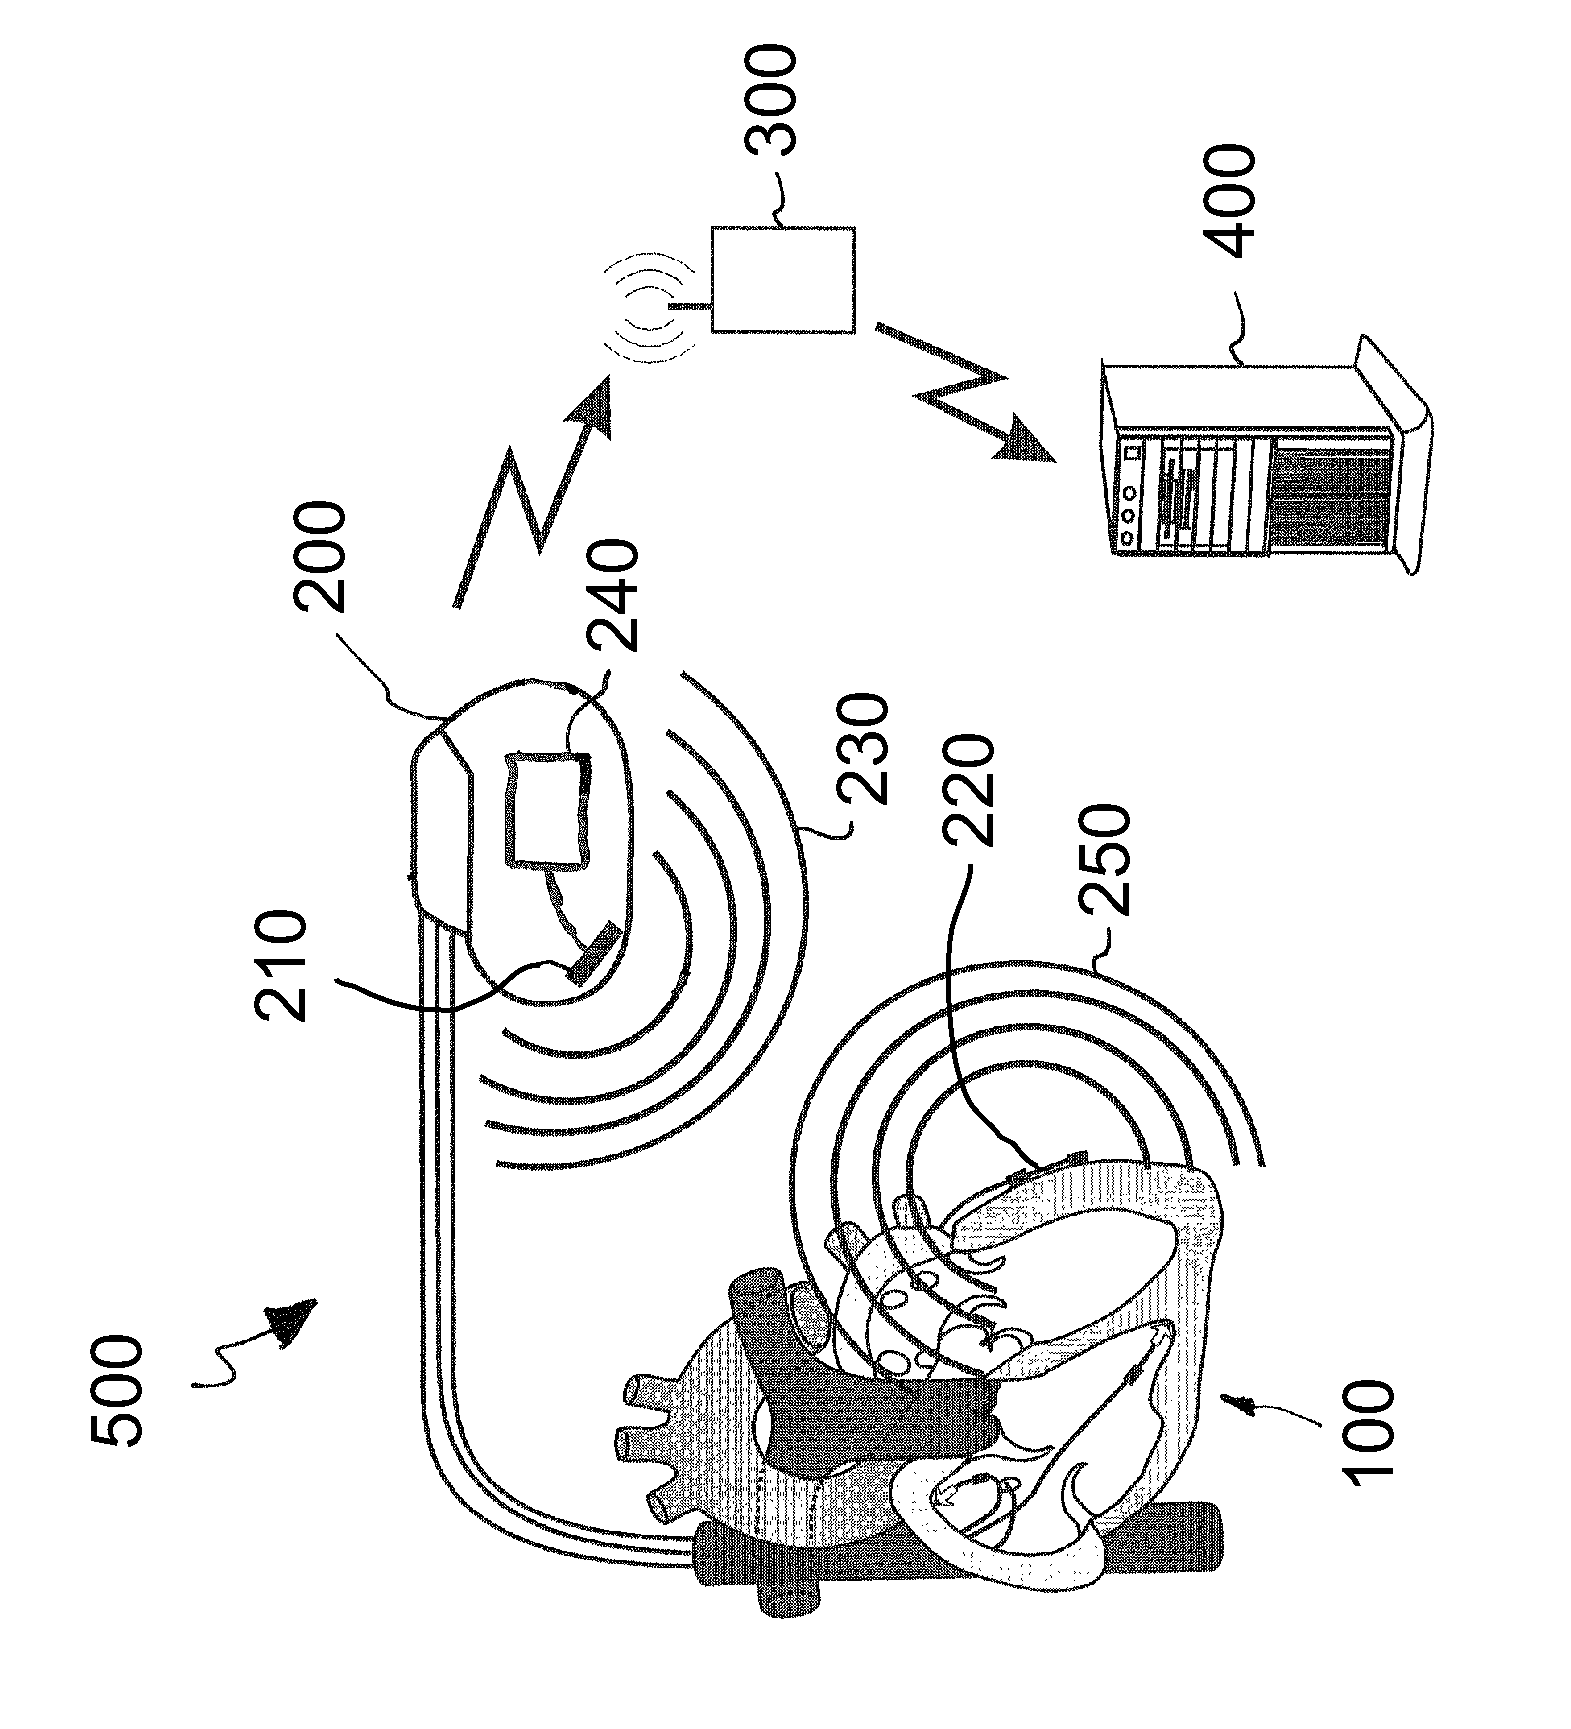 Implant and system for predicting decompensation